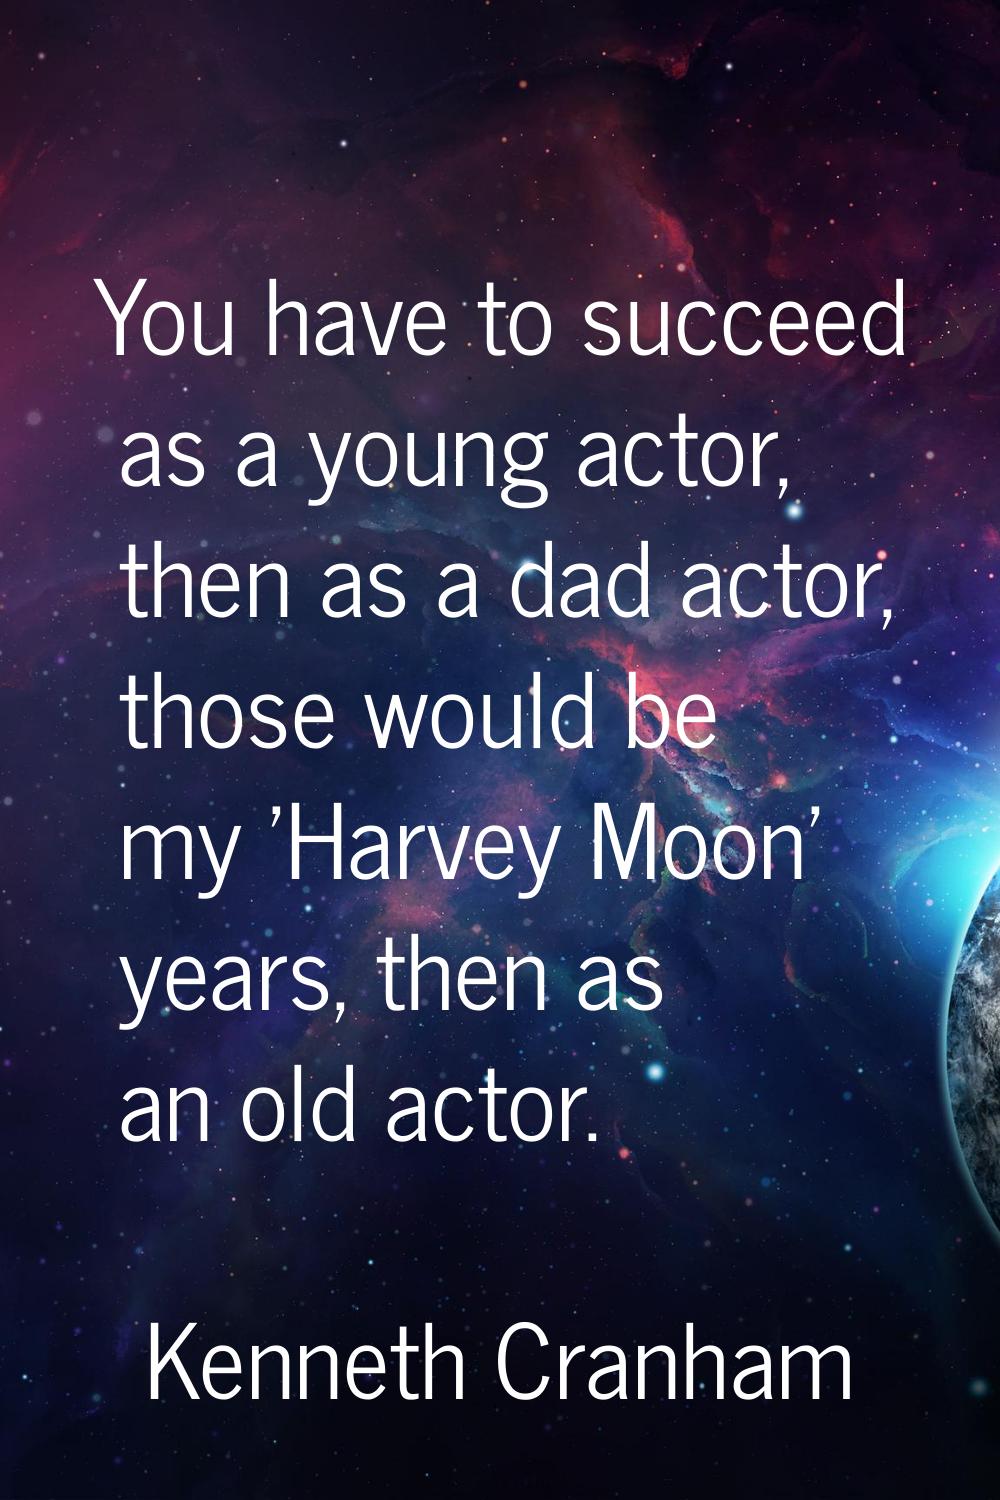 You have to succeed as a young actor, then as a dad actor, those would be my 'Harvey Moon' years, t